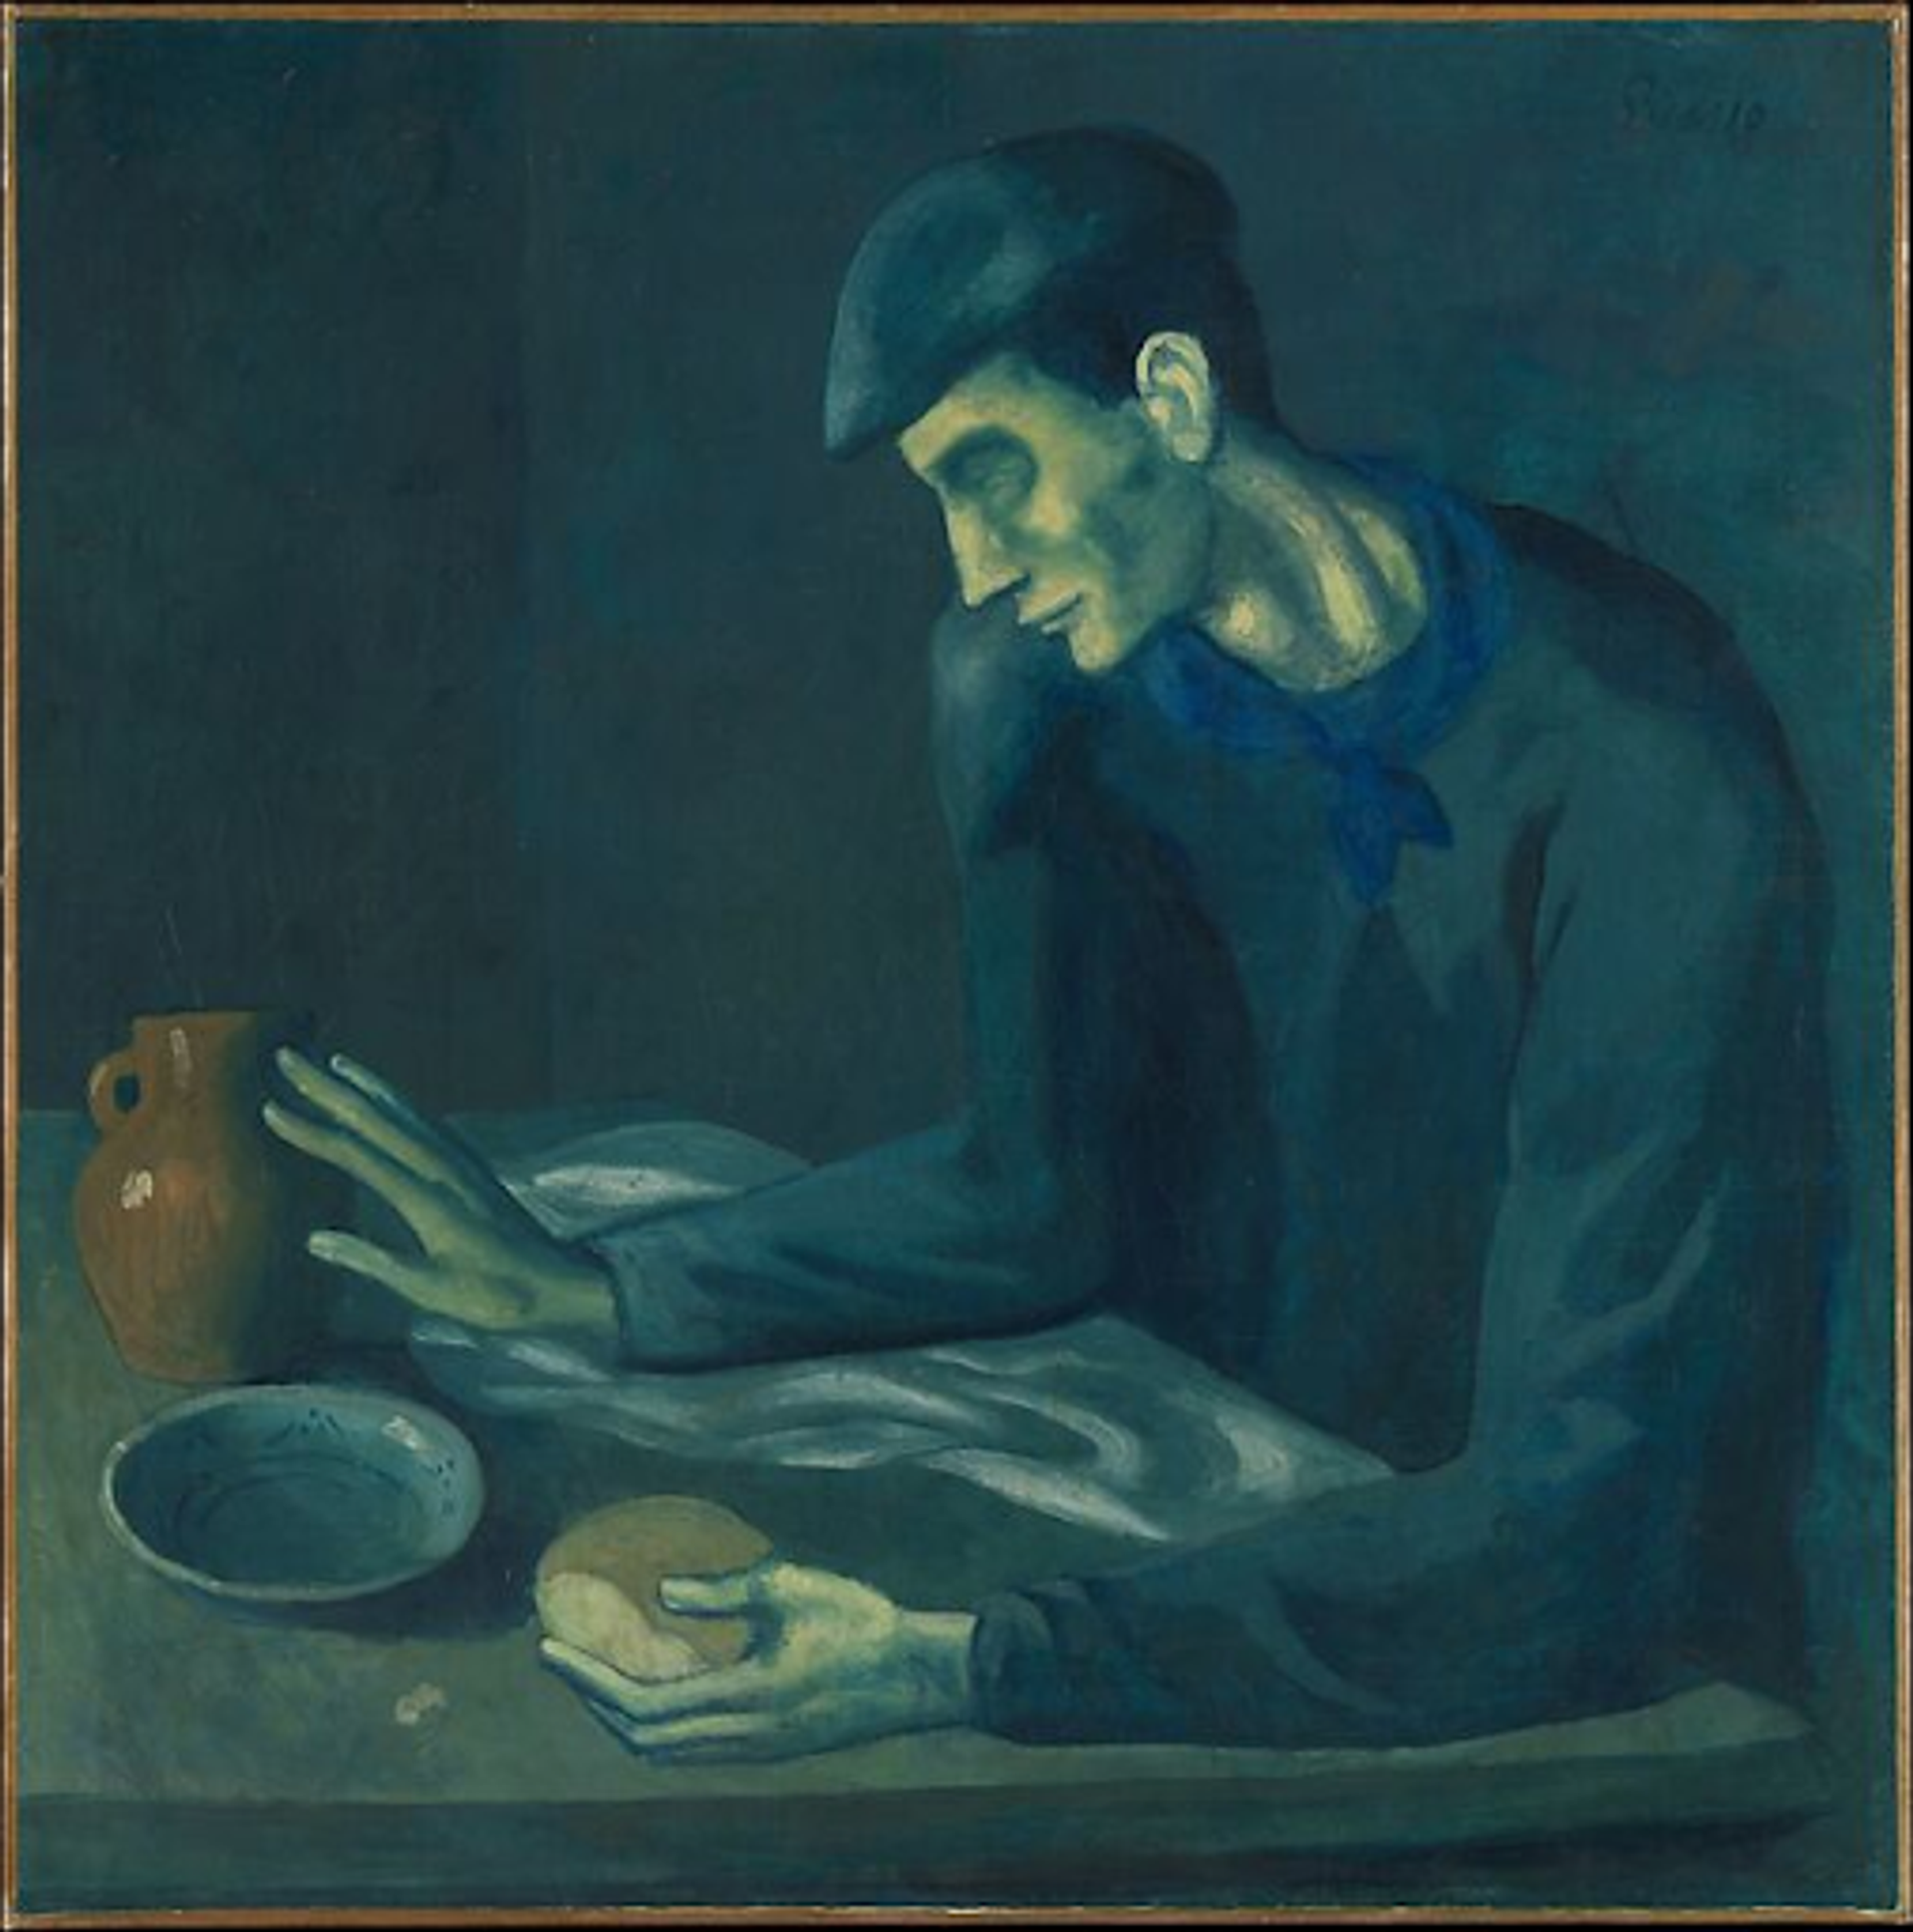 Pablo Picasso’s Le Repas De L’aveugle. A Blue Period painting of a man sitting alone at a dining table, holding a piece of bread, reaching for a pitcher, all with a blue overtone.